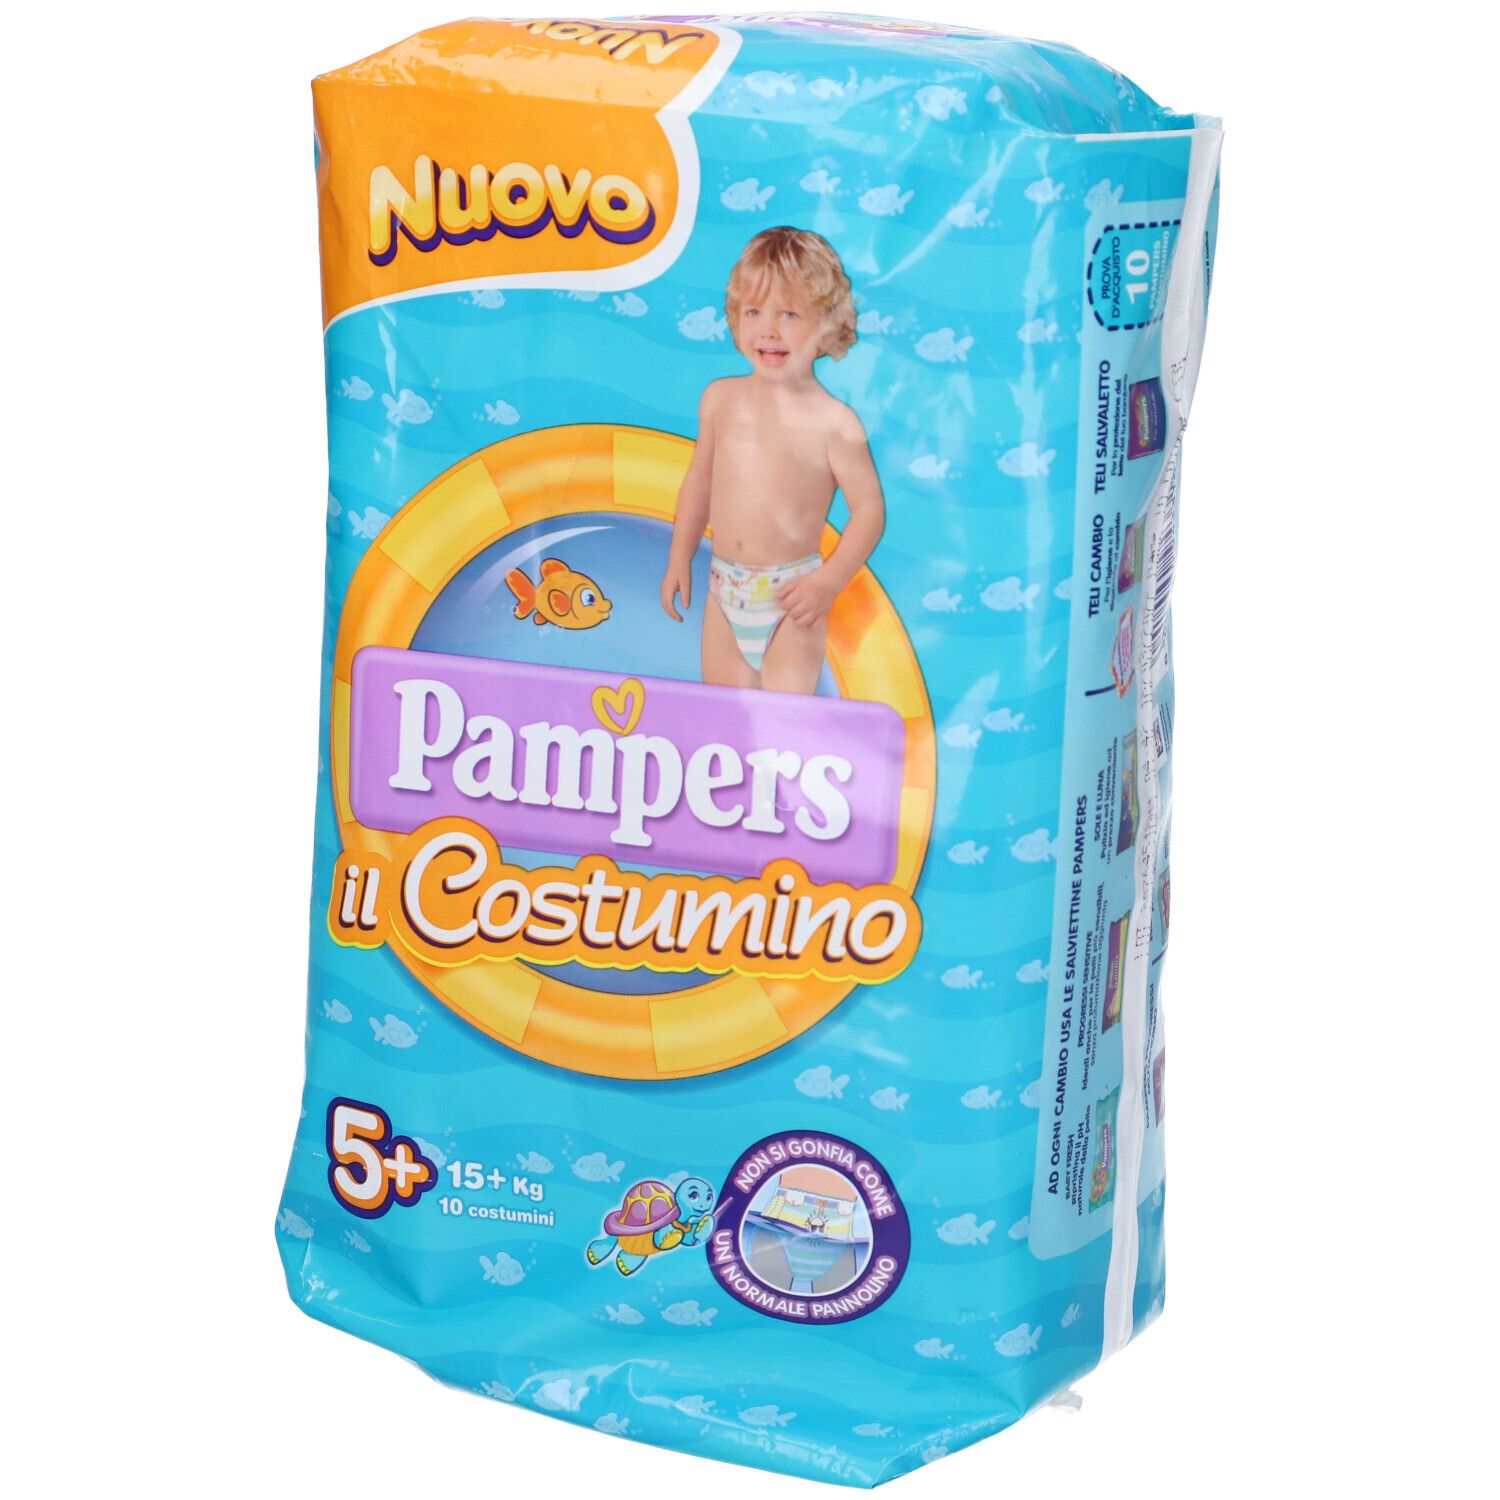 Pampers Il Costumino 5+